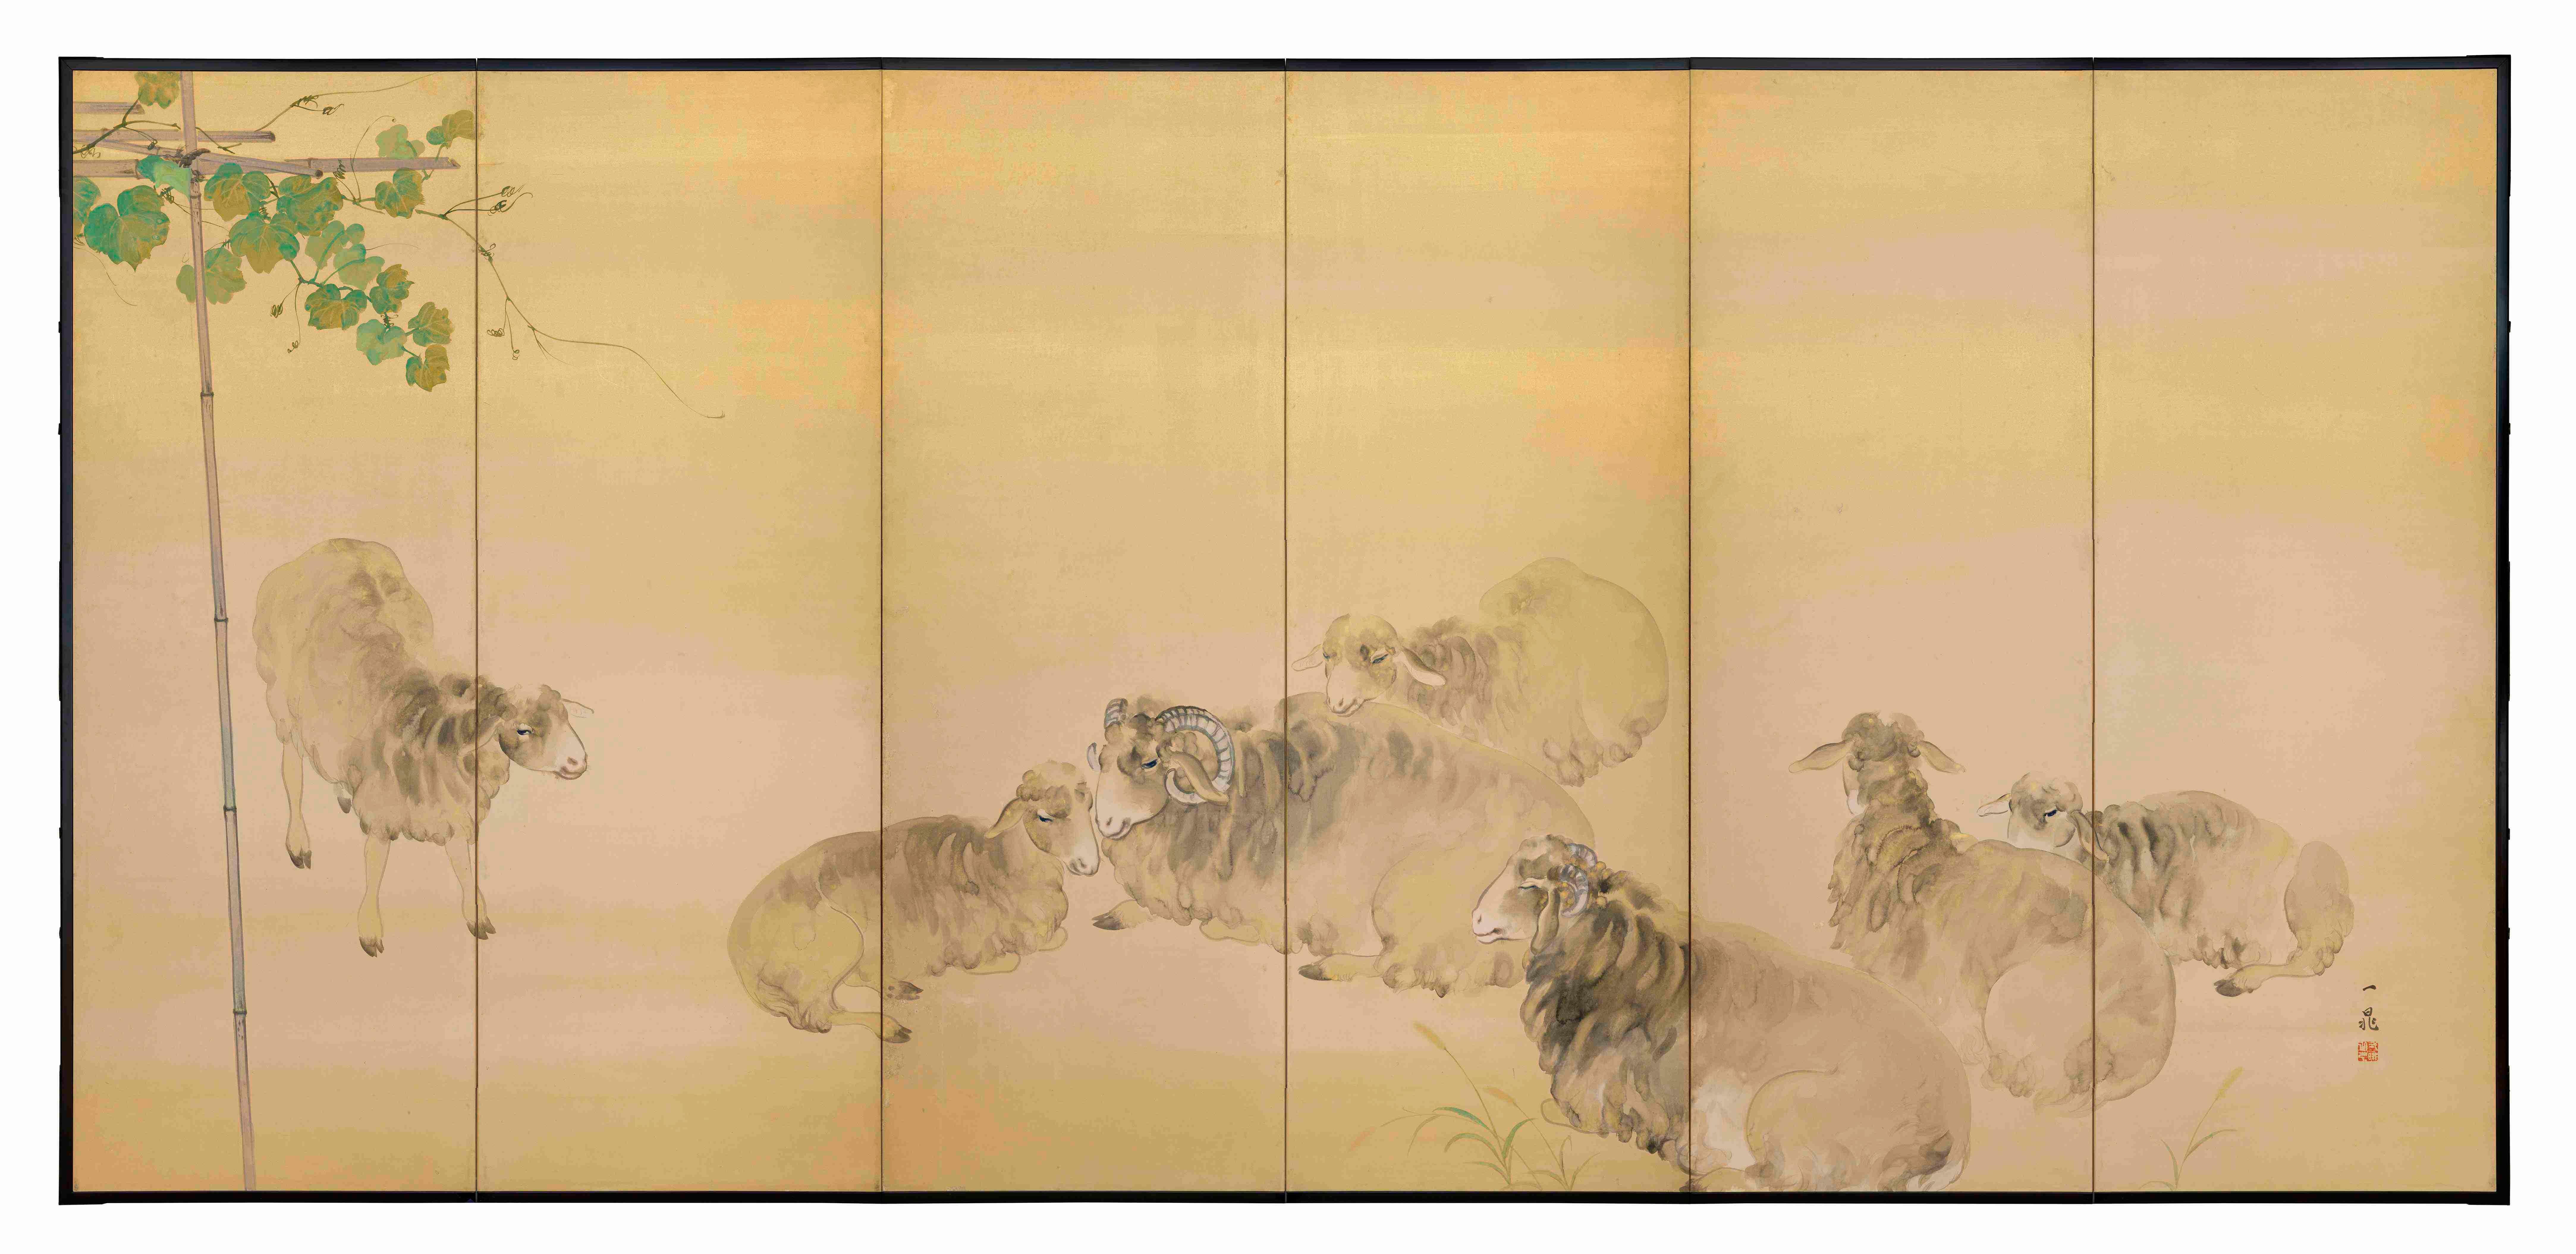 The screen is made from ink, mineral colors, gofun (powdered calcified shell) and gold wash on paper and dated (Showa era (1926–1989)).

In this tranquil fall scene, a flock of sheep-farm animals not often seen in earlier Japanese art-graze and